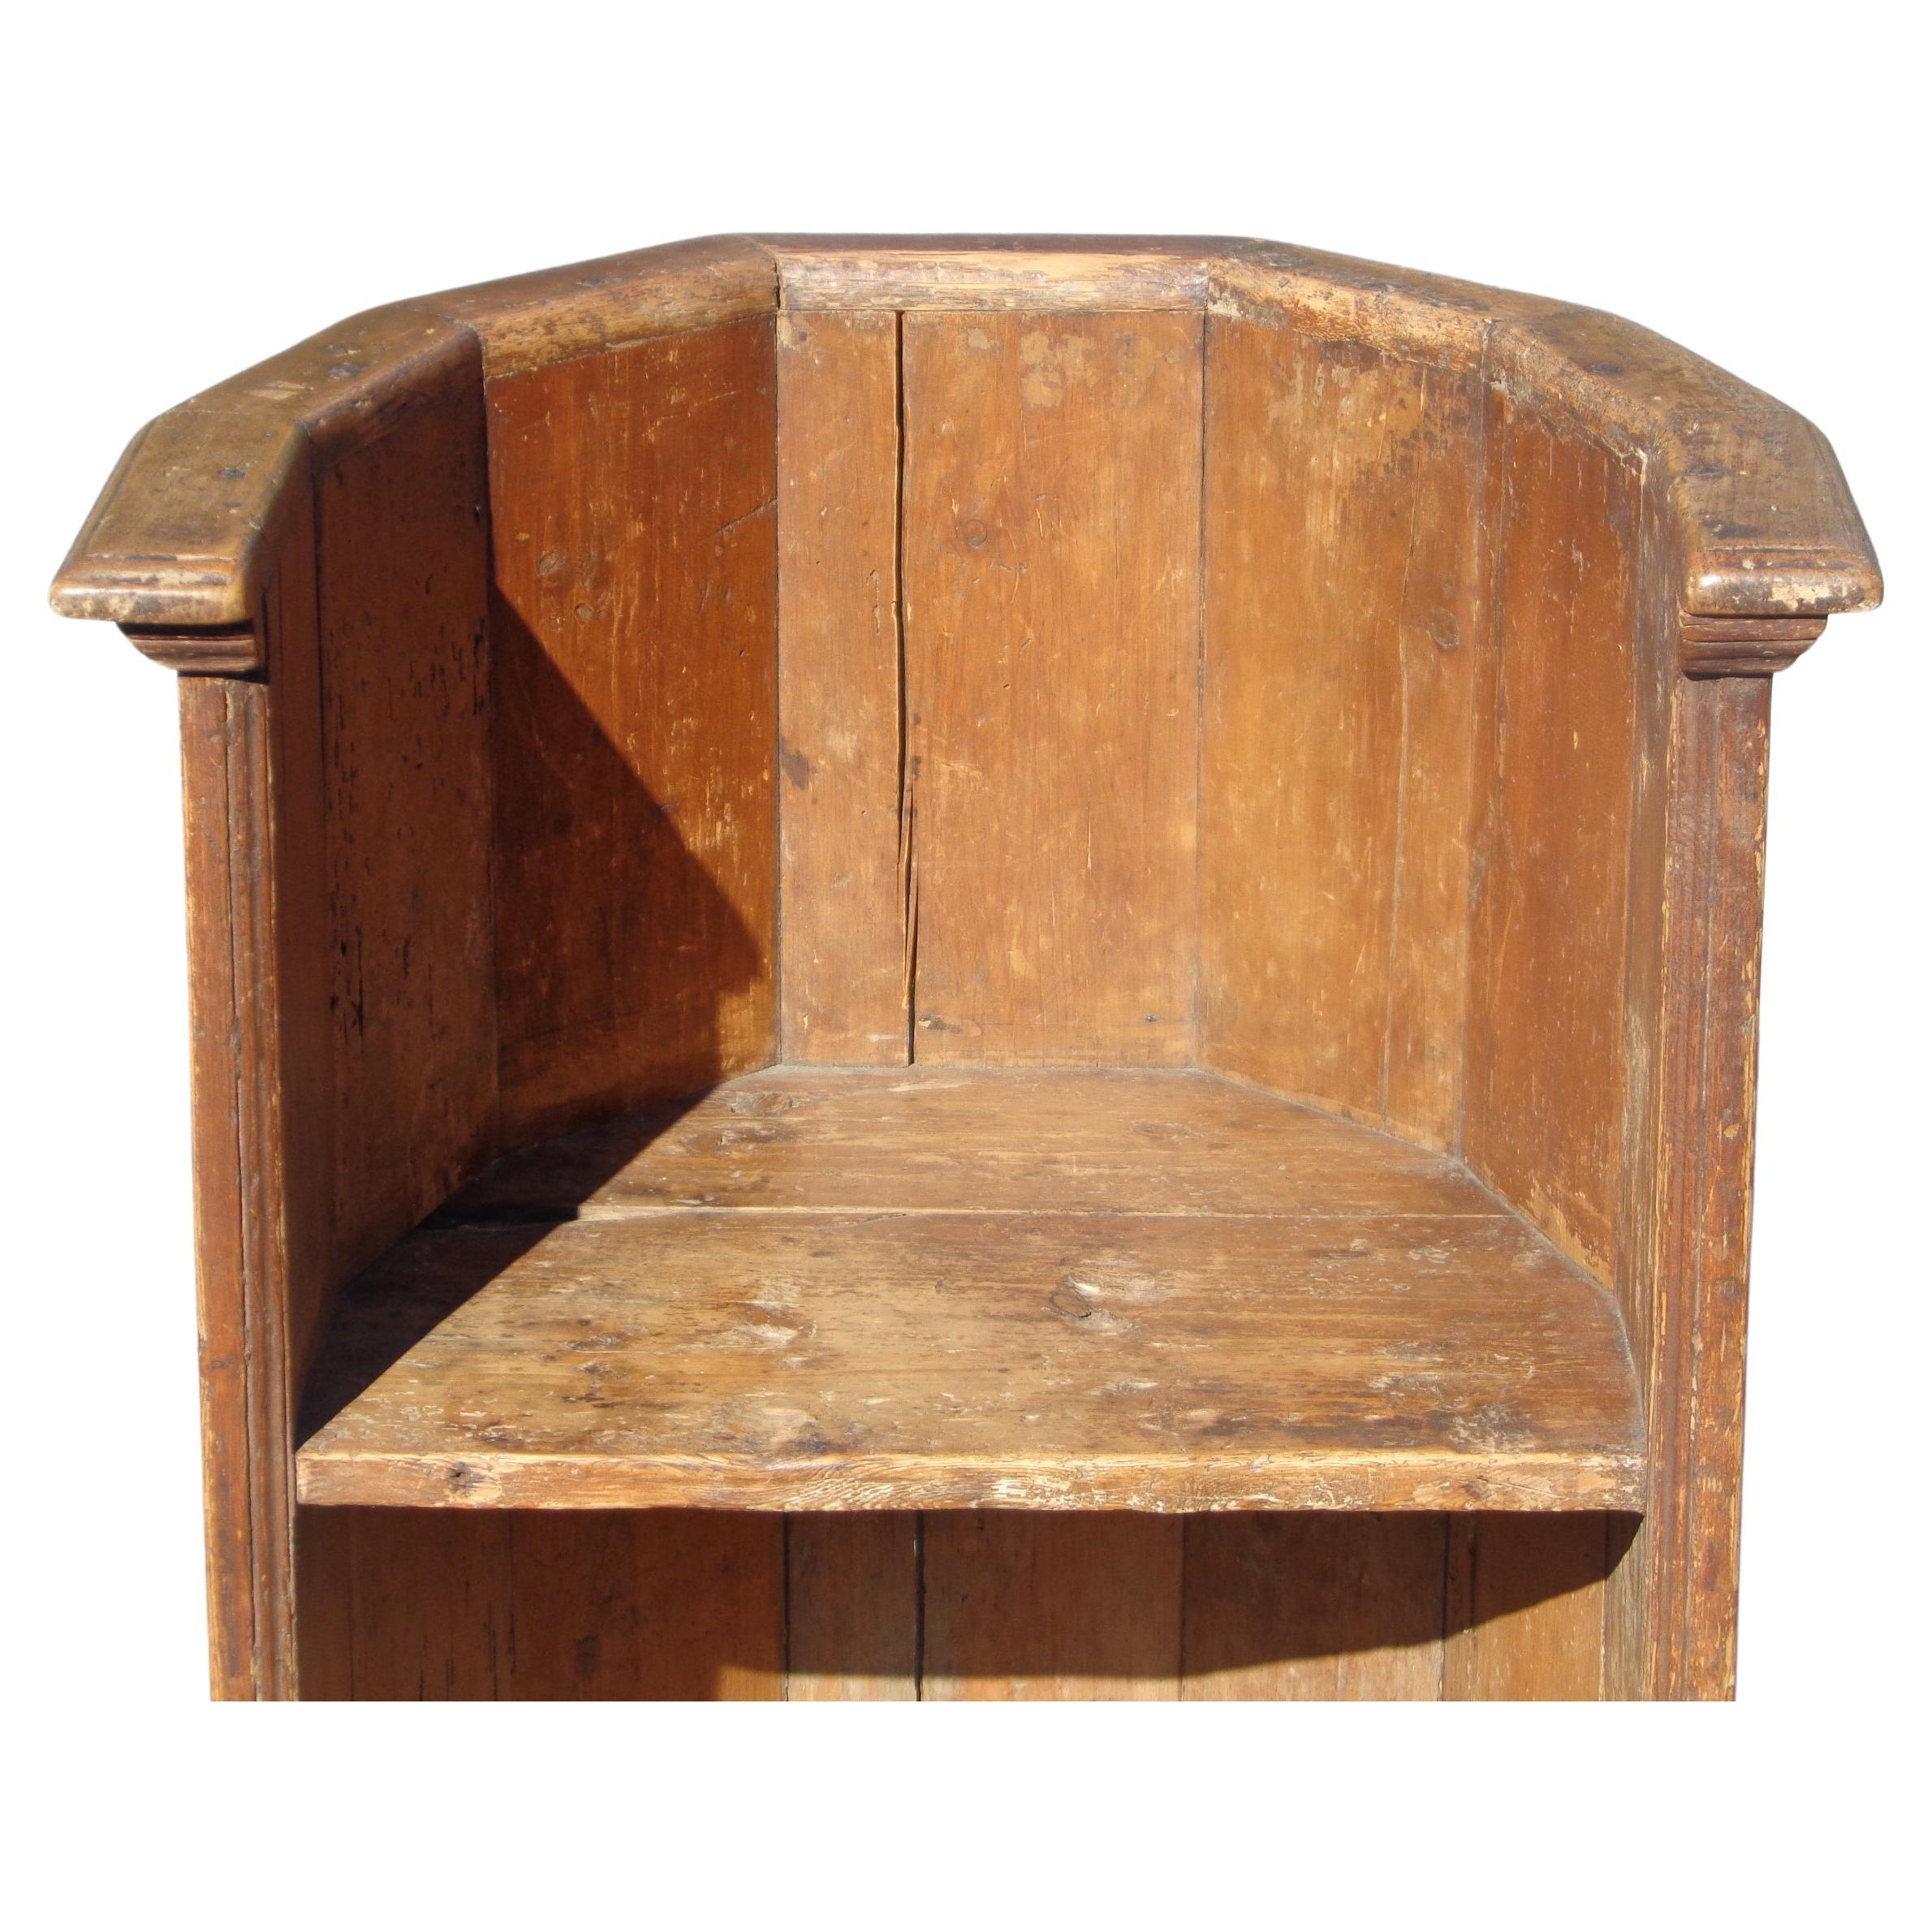 Wood Antique 18th Century Rustic Choir Stall Barrel Chair For Sale